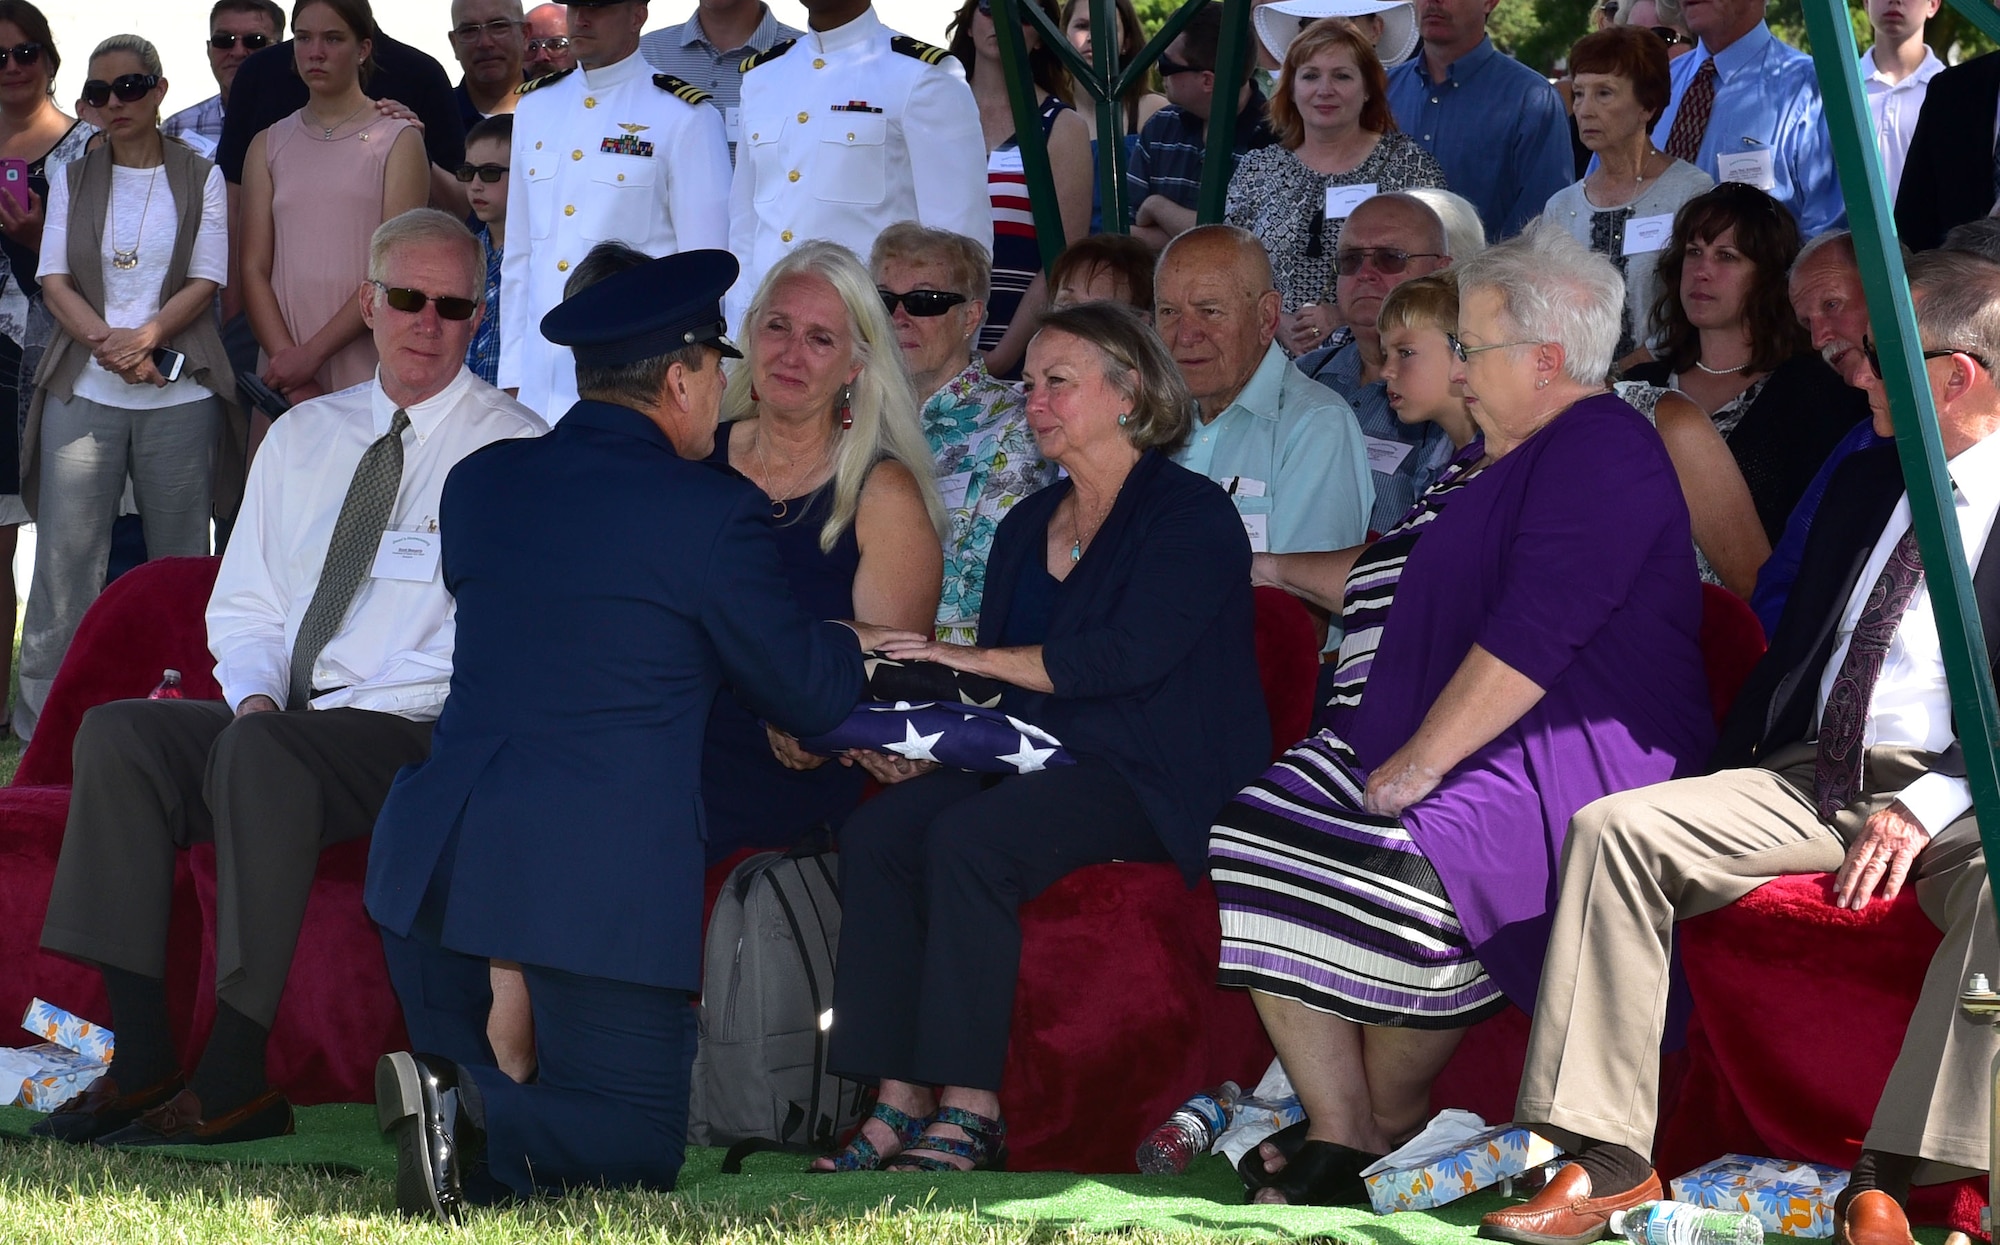 Lynn Evans, niece of John Dean Armstrong, a Flying Tiger, is presented a flag during Armstrong’s funeral, June 17, 2017, in Hutchinson, Kan. Evans was presented with a current American flag and a flag from Armstrong’s time in the American Volunteer Group. (U.S. Air Force photo/Staff Sgt. Trevor Rhynes)